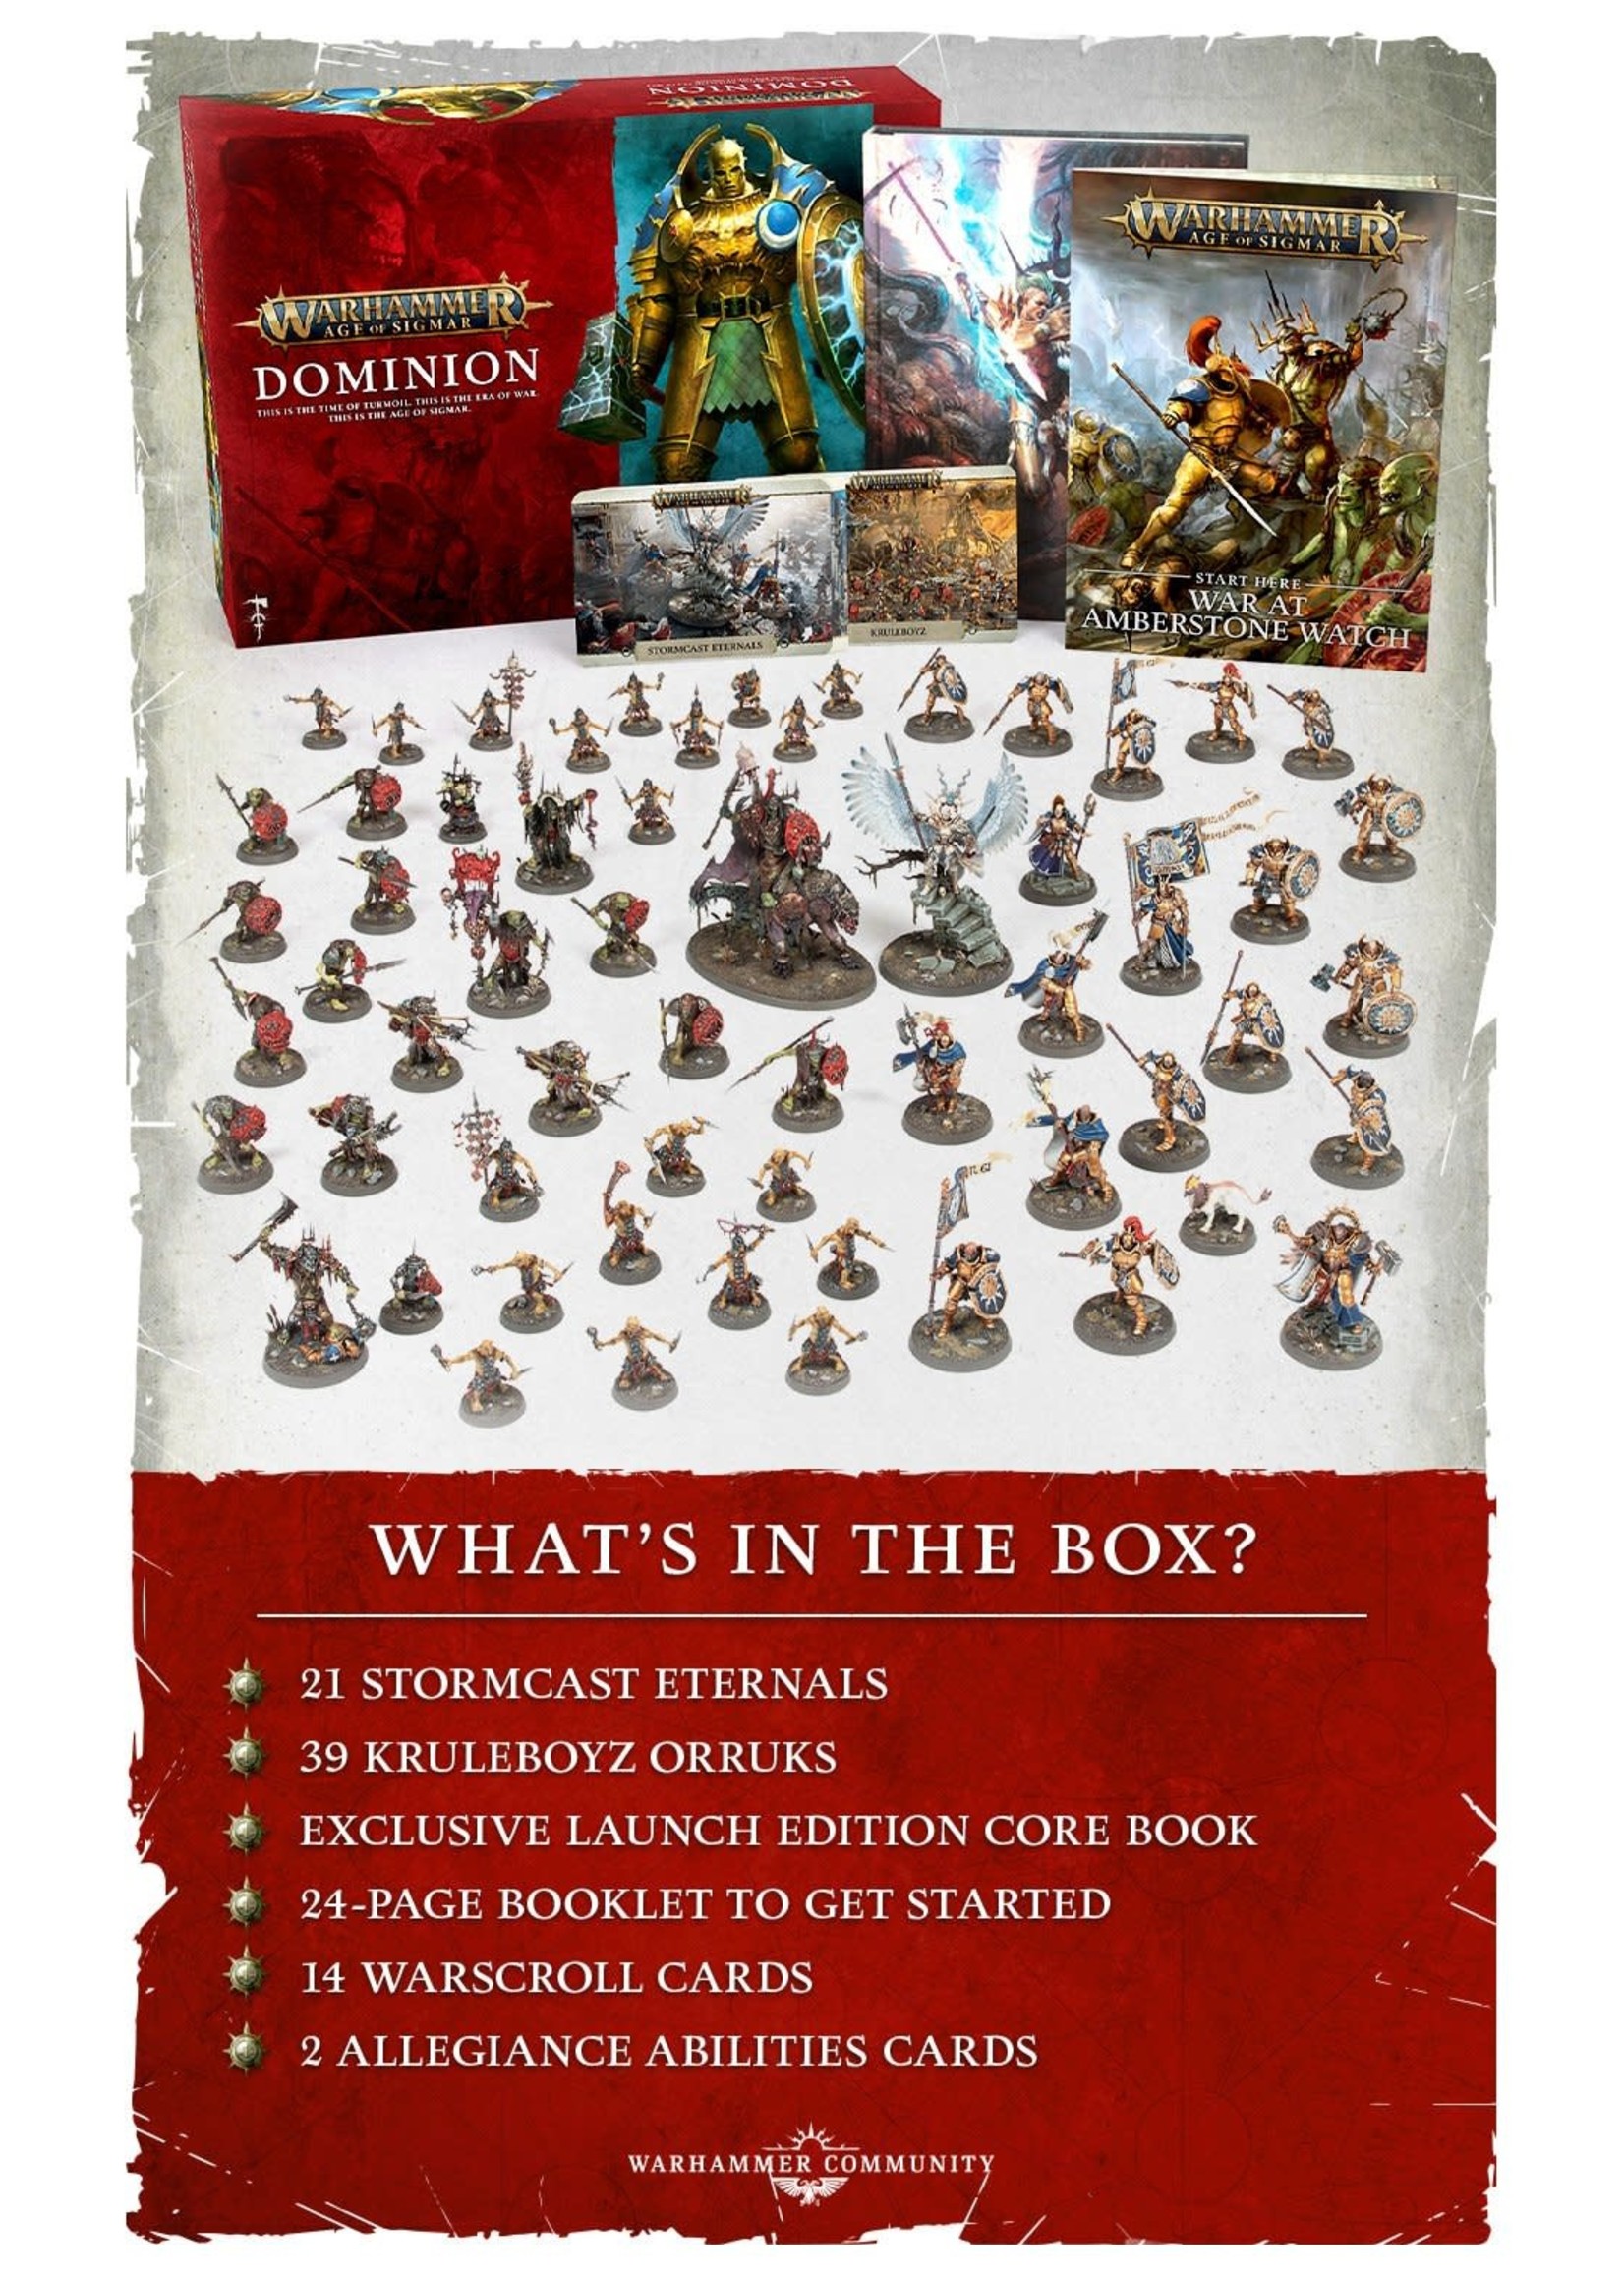 Games Workshop Age of Sigmar: Dominion